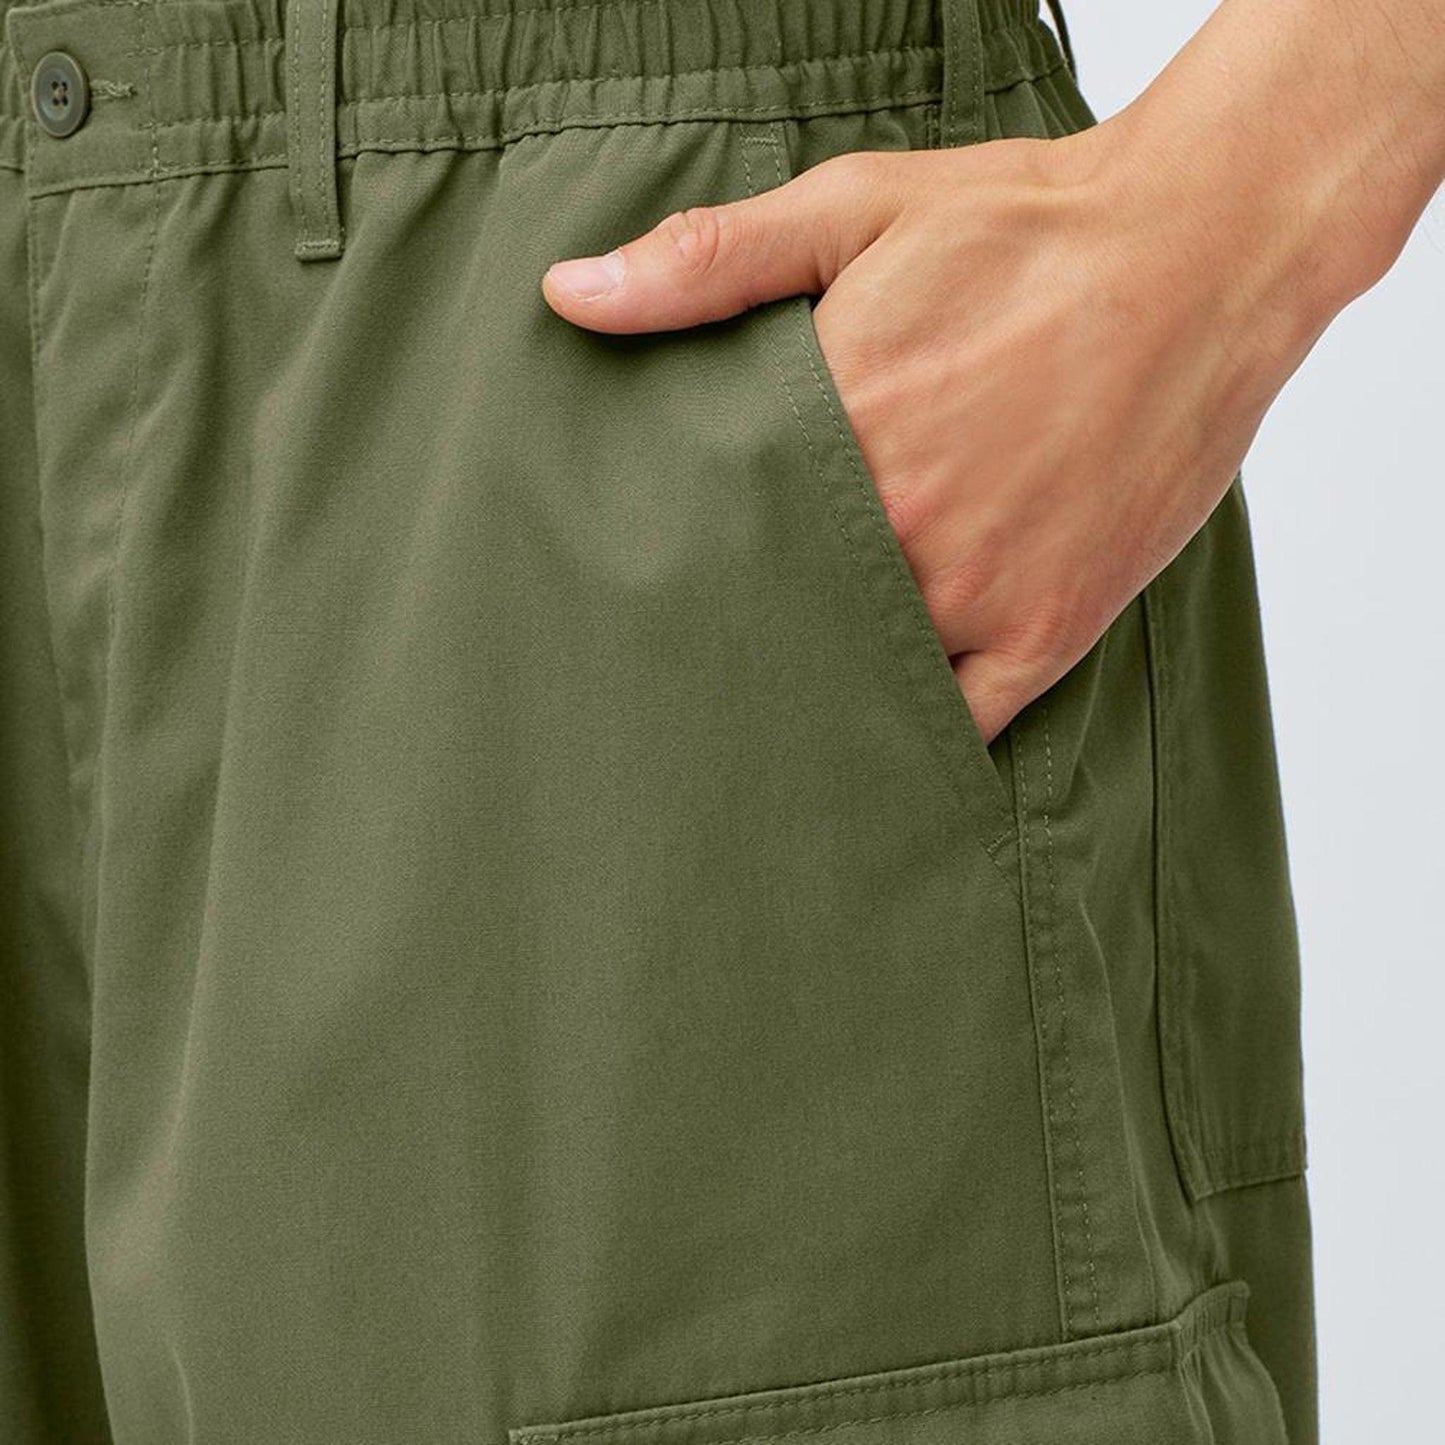 LOOPSTER UNISEX Olive Green Ultra Baggy Cargo - Loopster